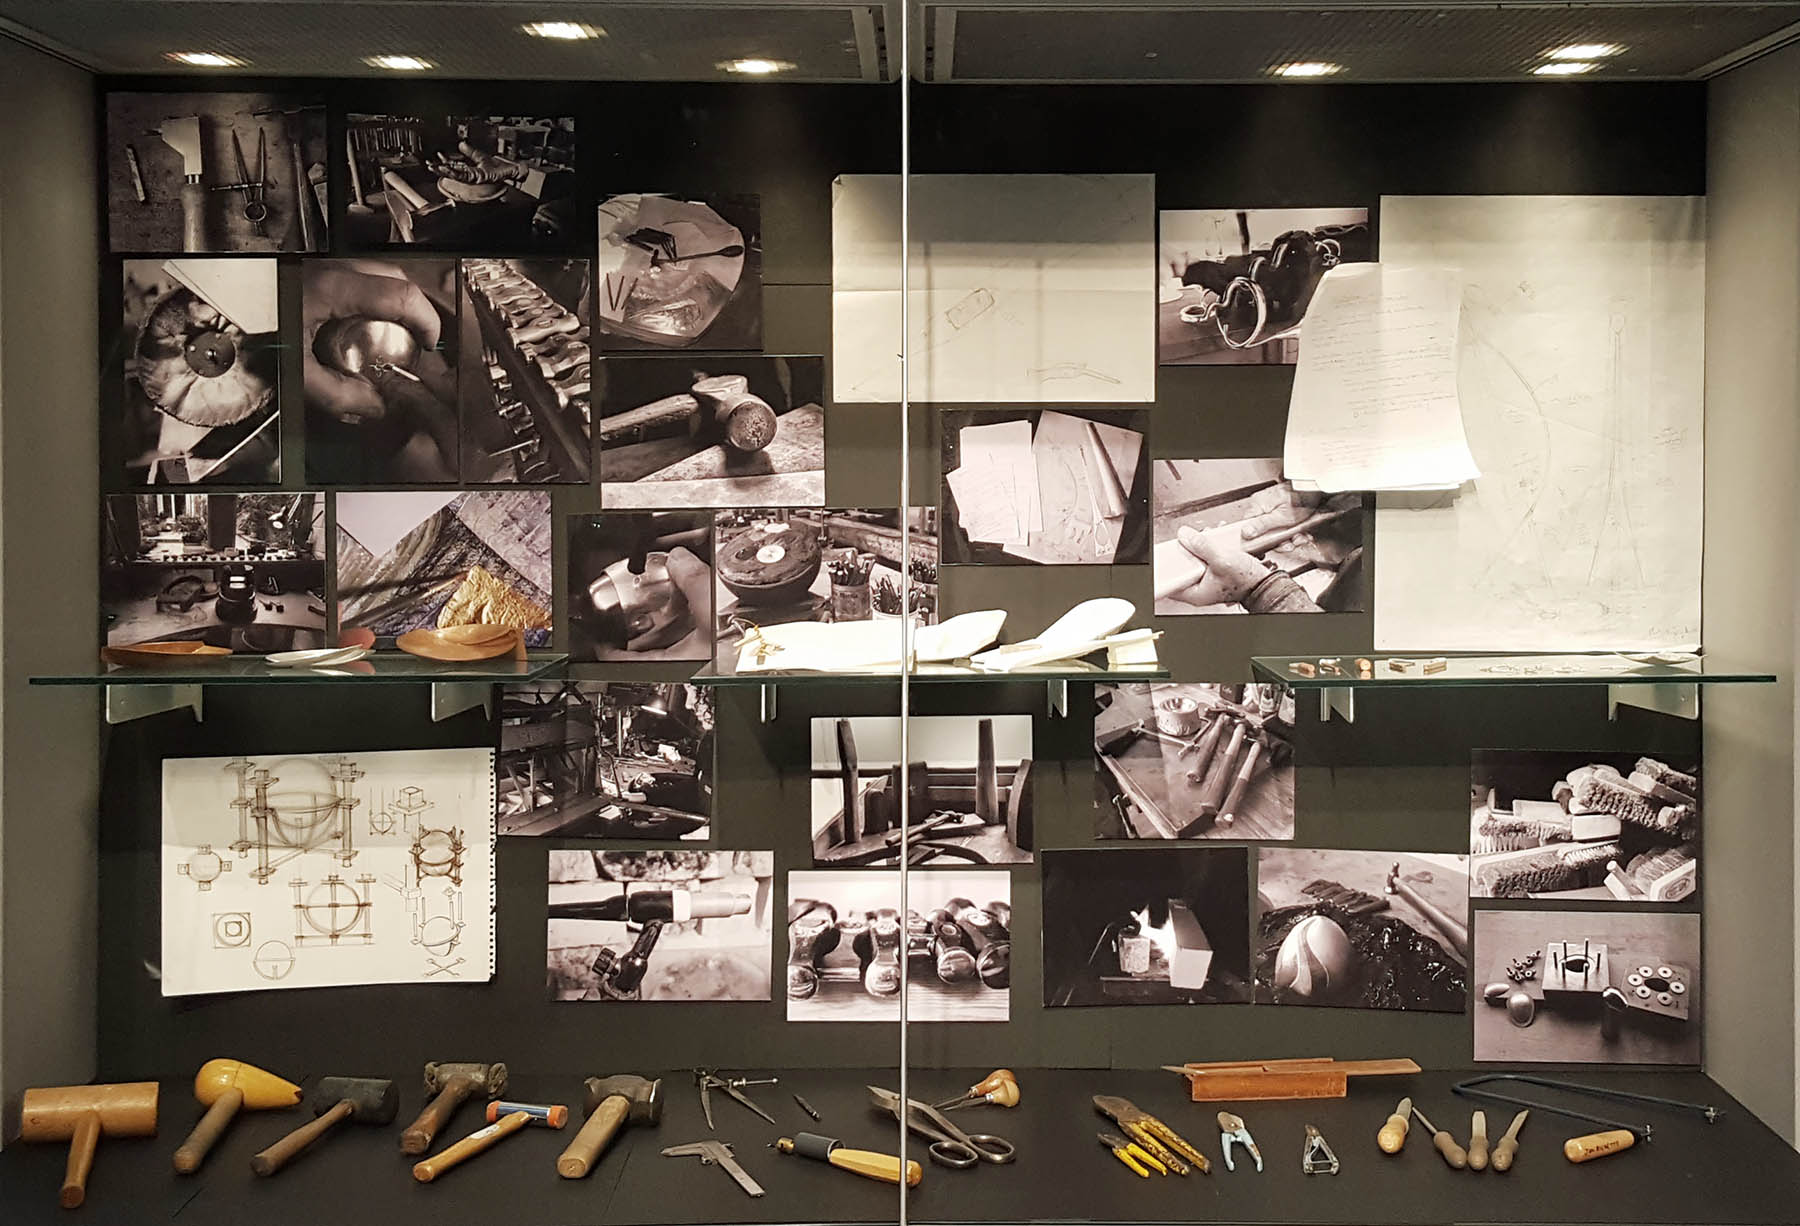 Silver Speaks Form Exhibition display case - Photos of tools and manufacturing process with technical drawings, maquettes, samples and silversmithing tools